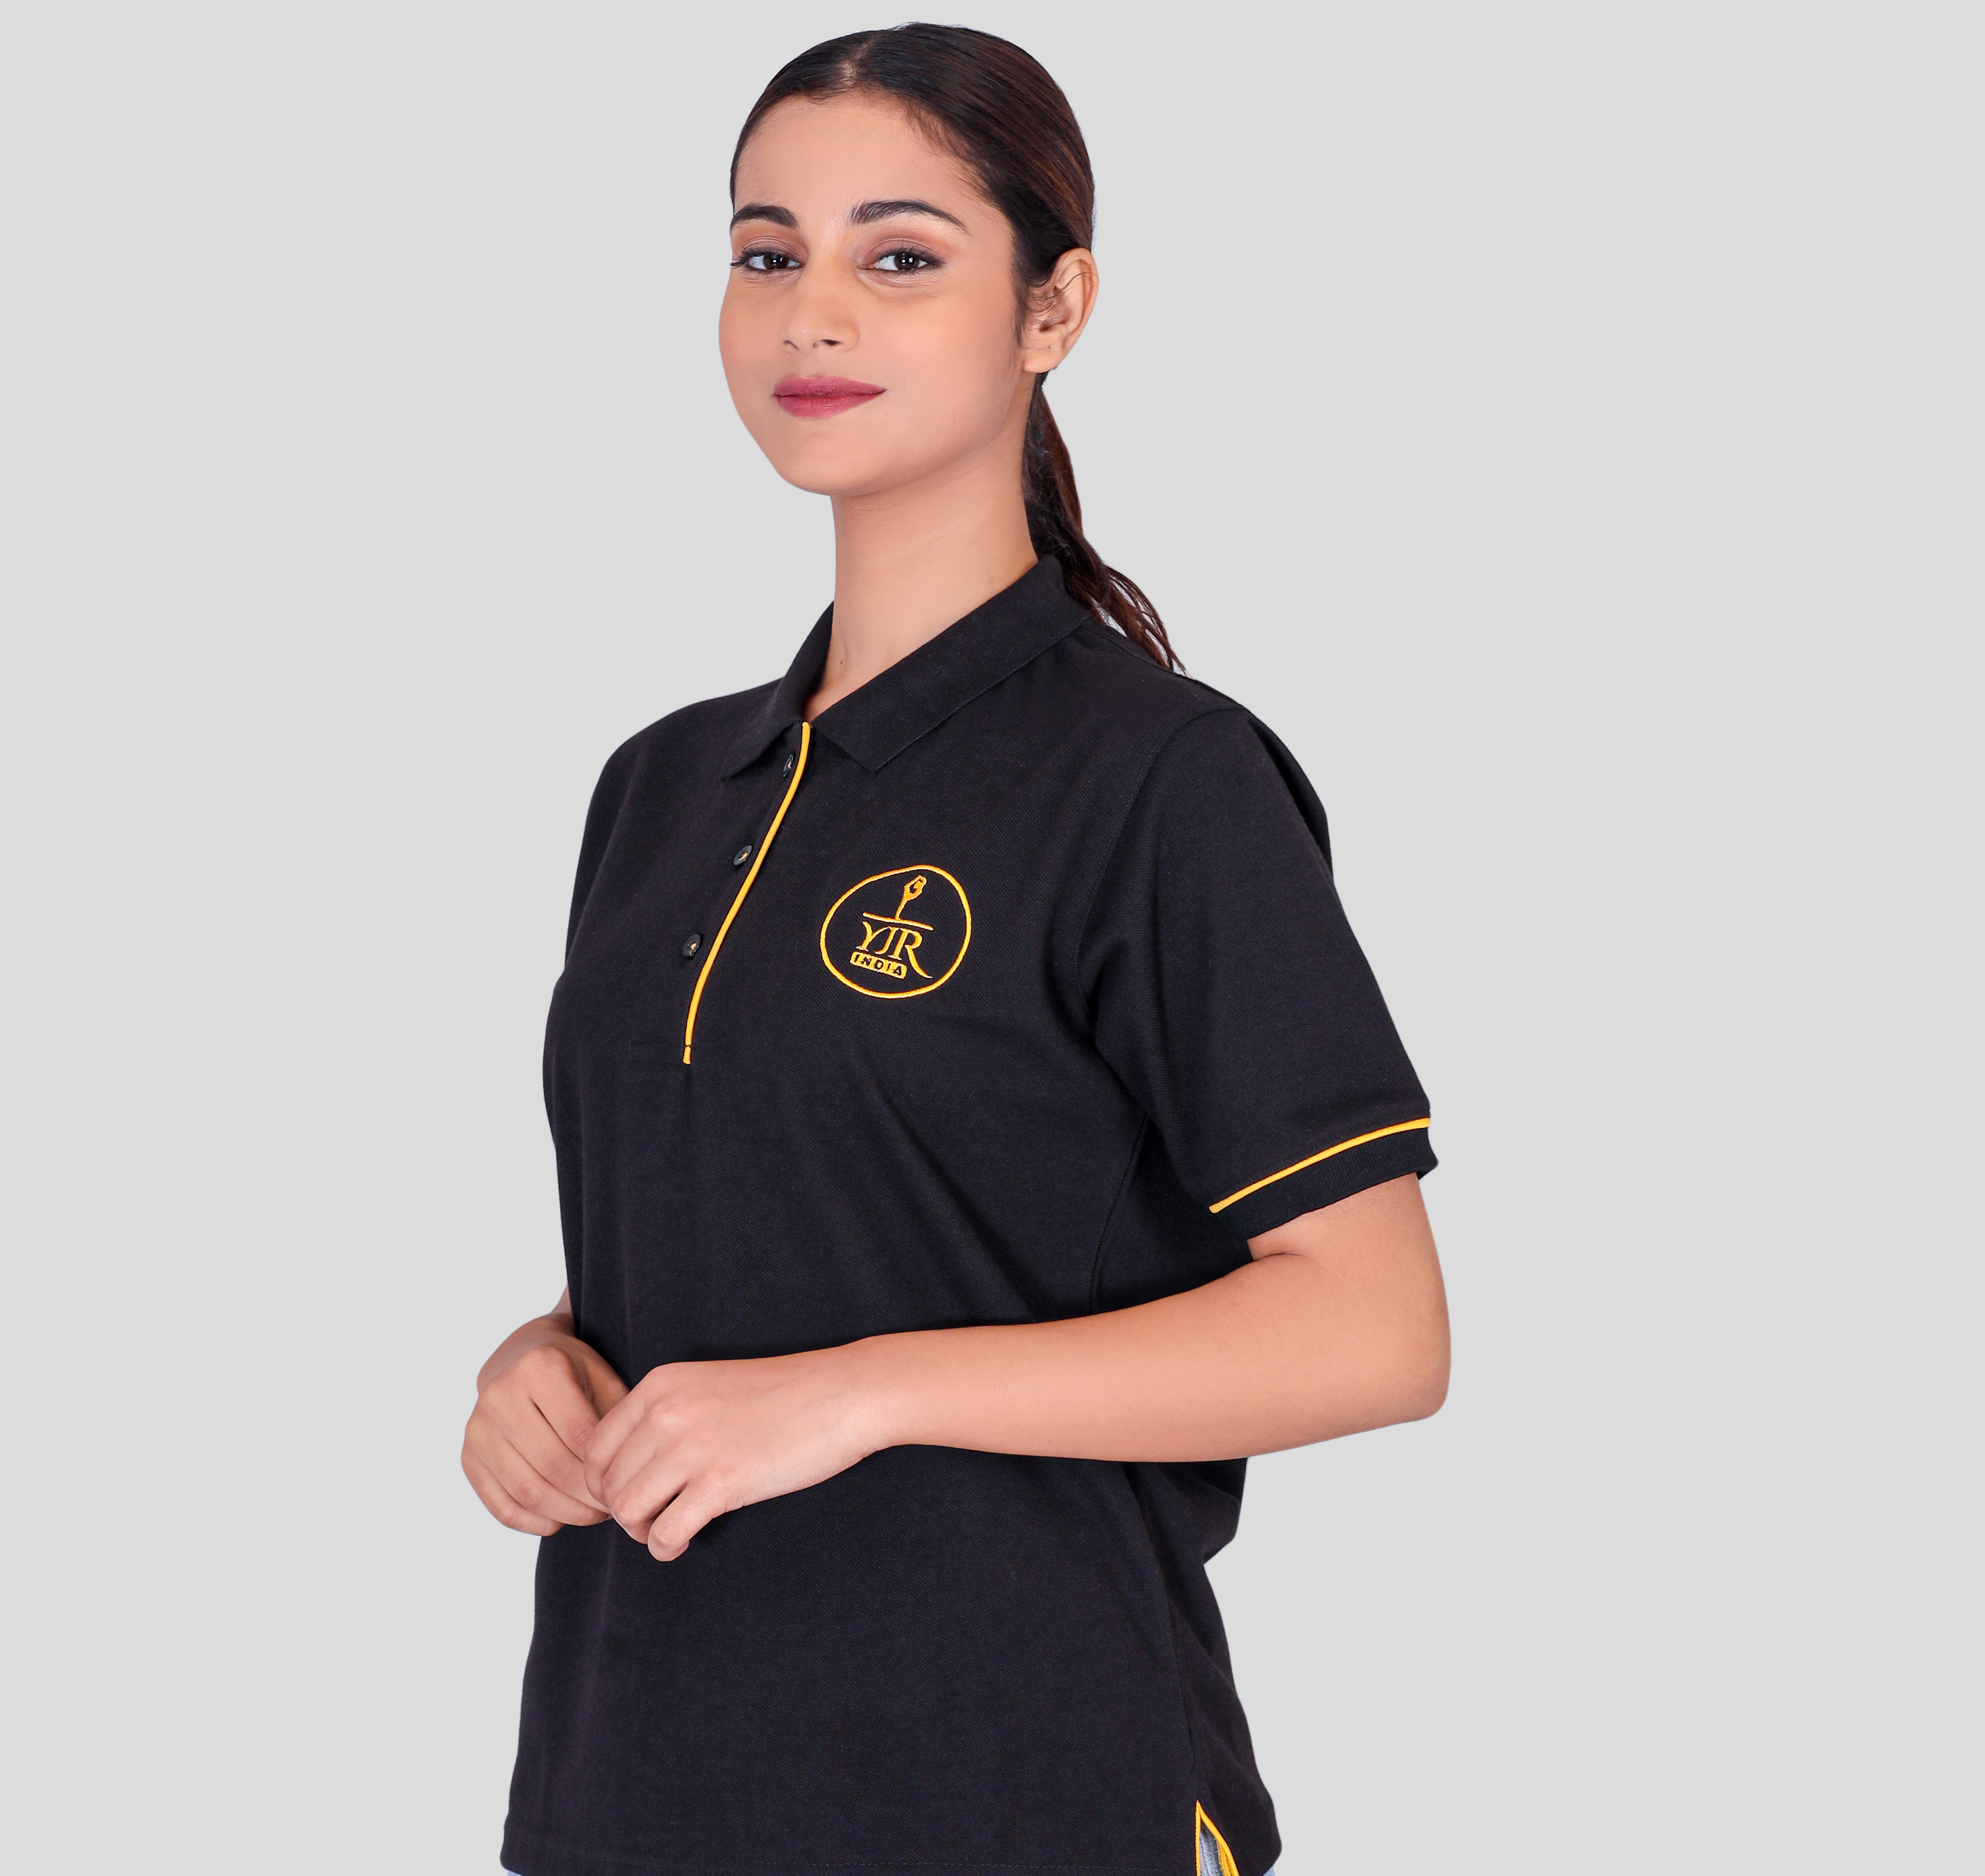 Yjr black promotional polo t-shirts supplier 